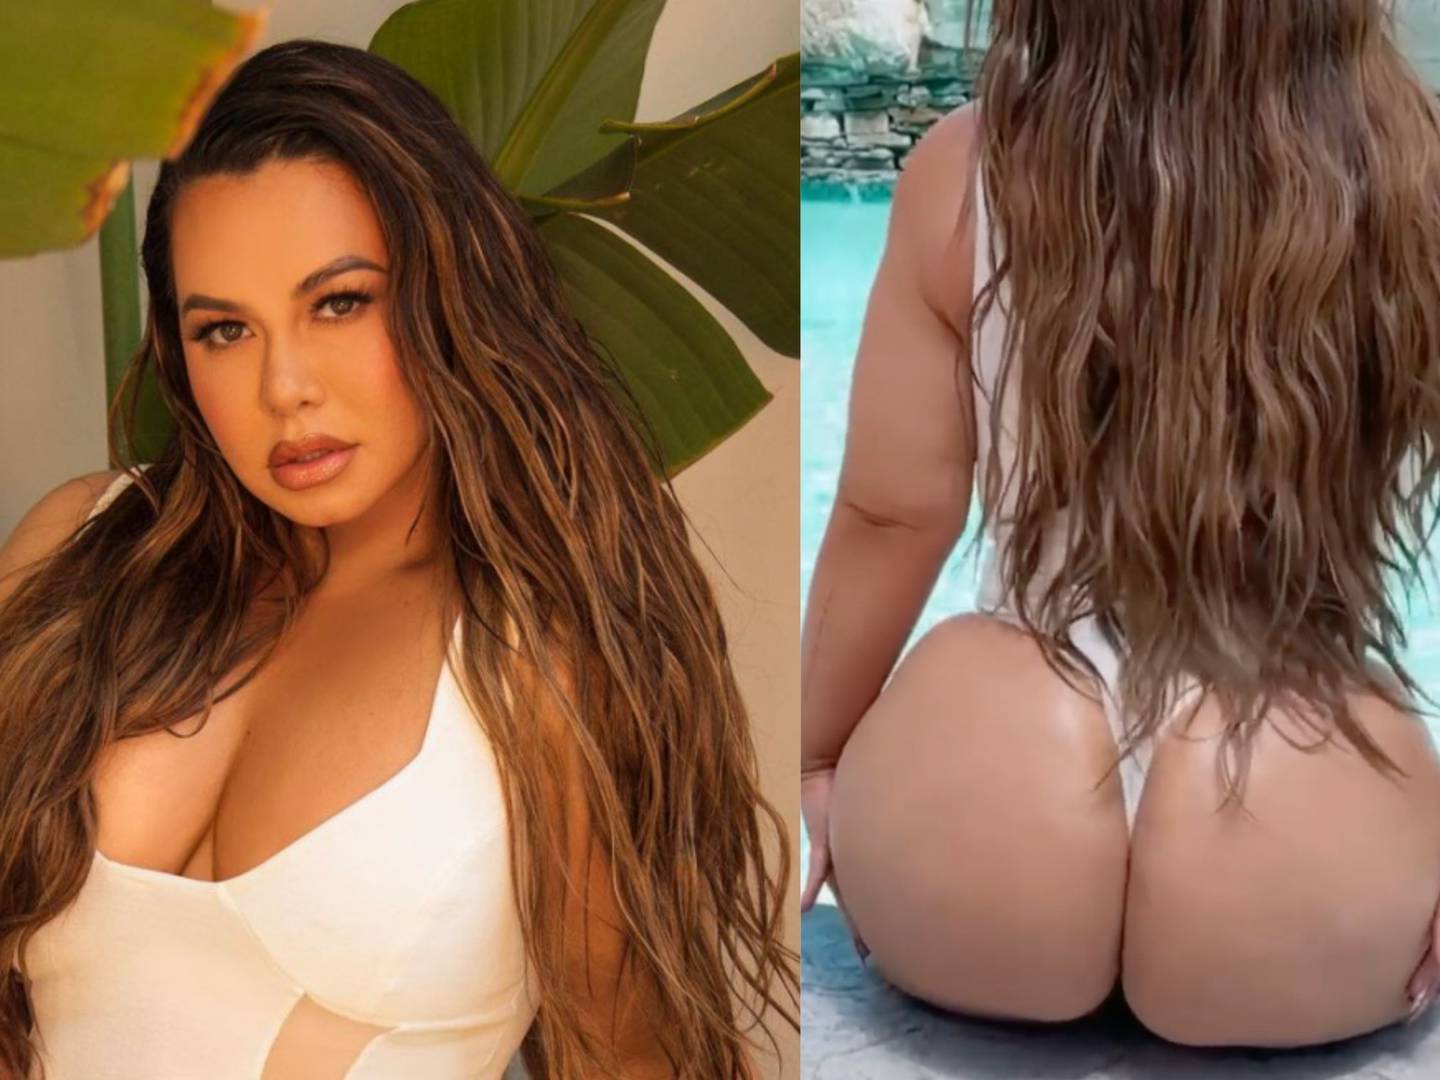 algl recommends chiquis rivera booty pic